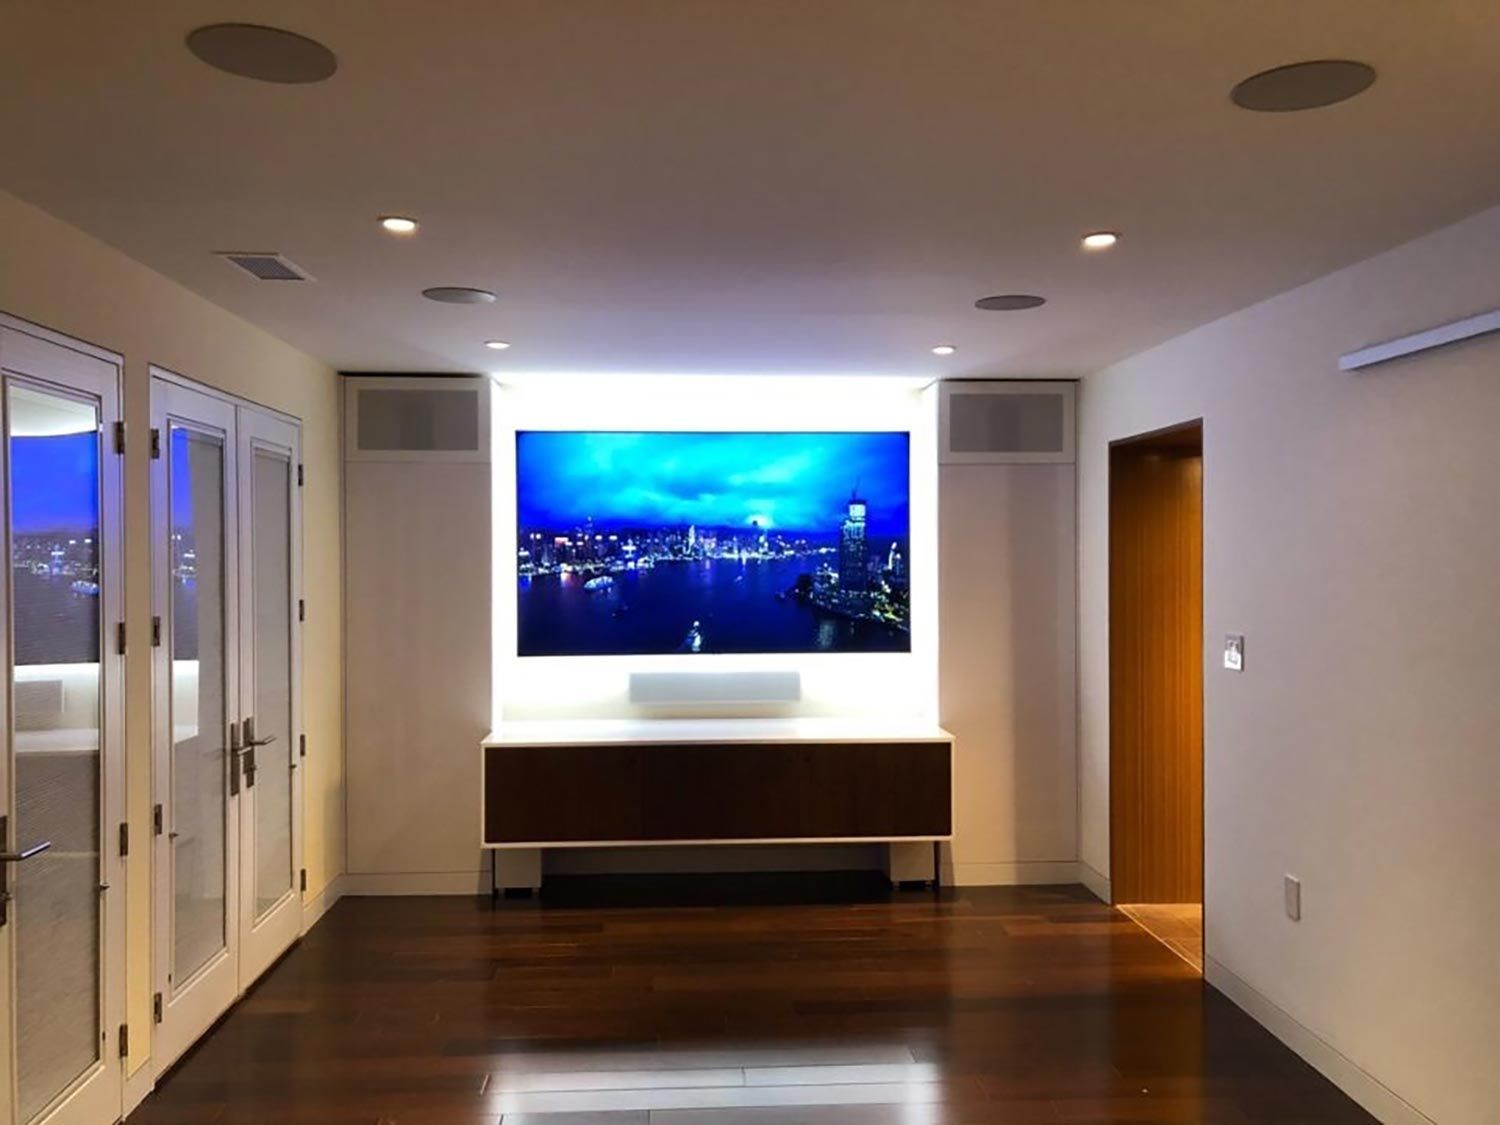 Media Room with in-ceiling speakers and LED lighting